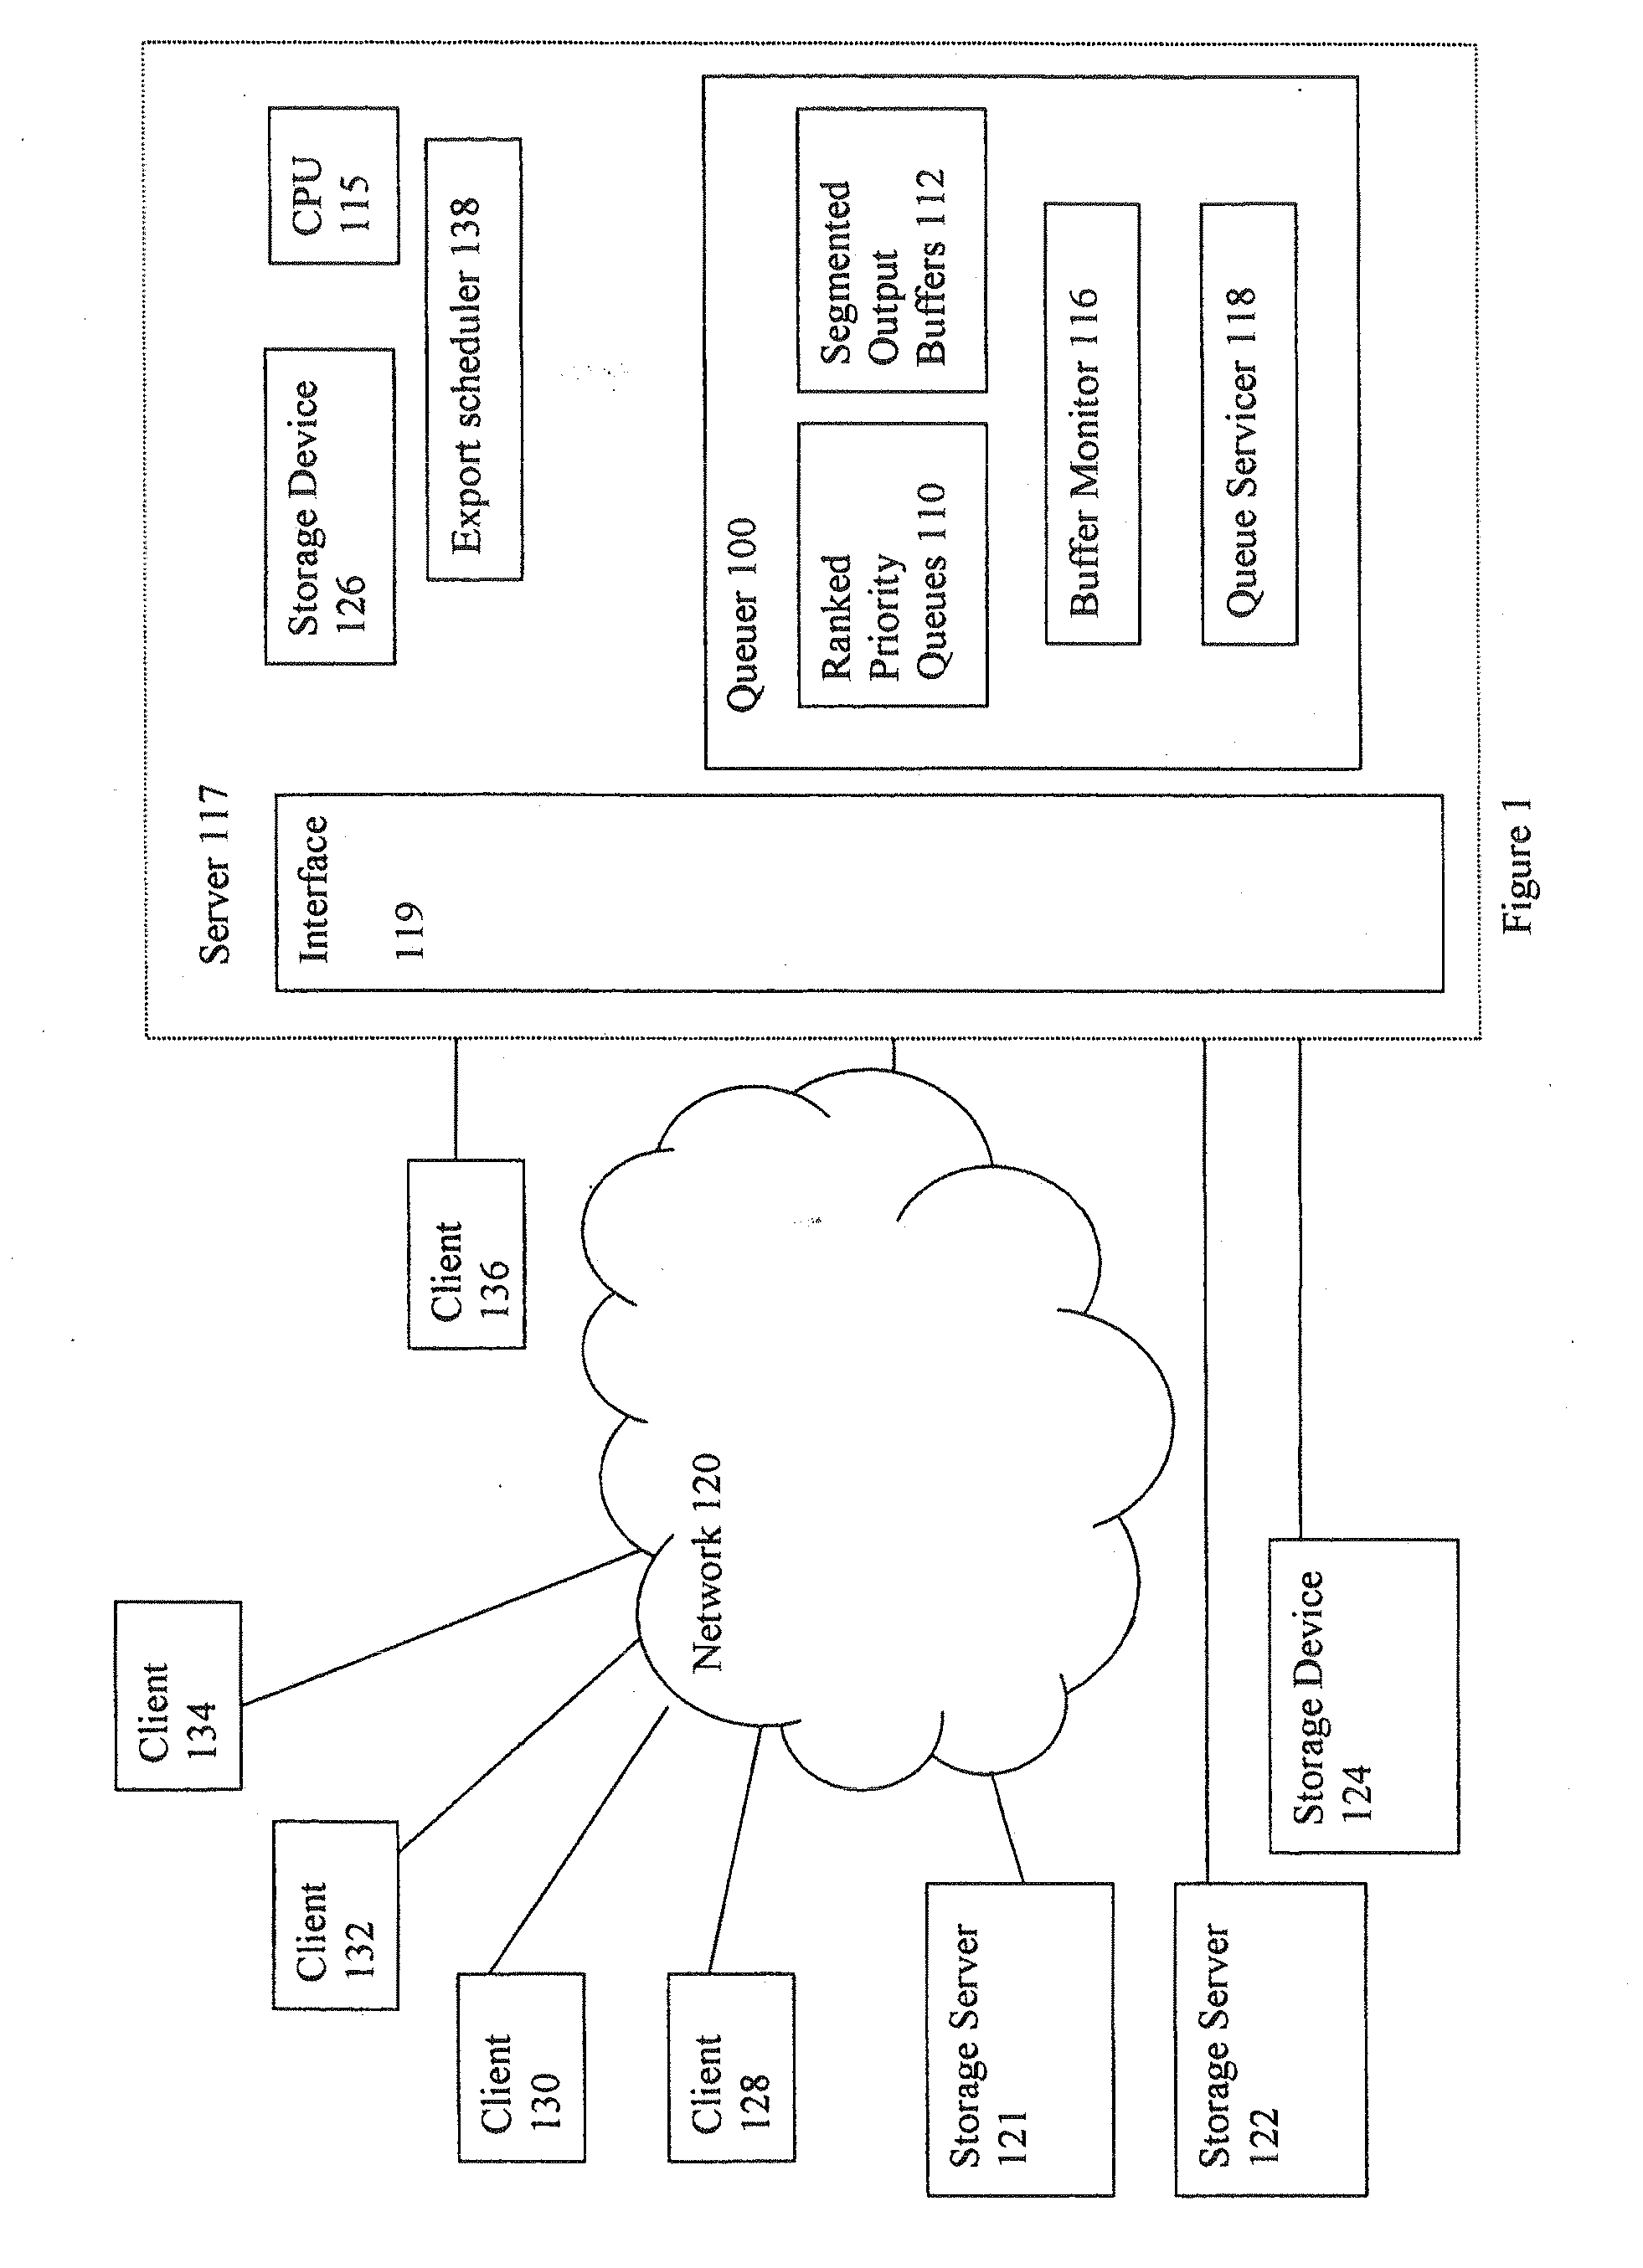 Apparatus and method for priority queuing with segmented buffers